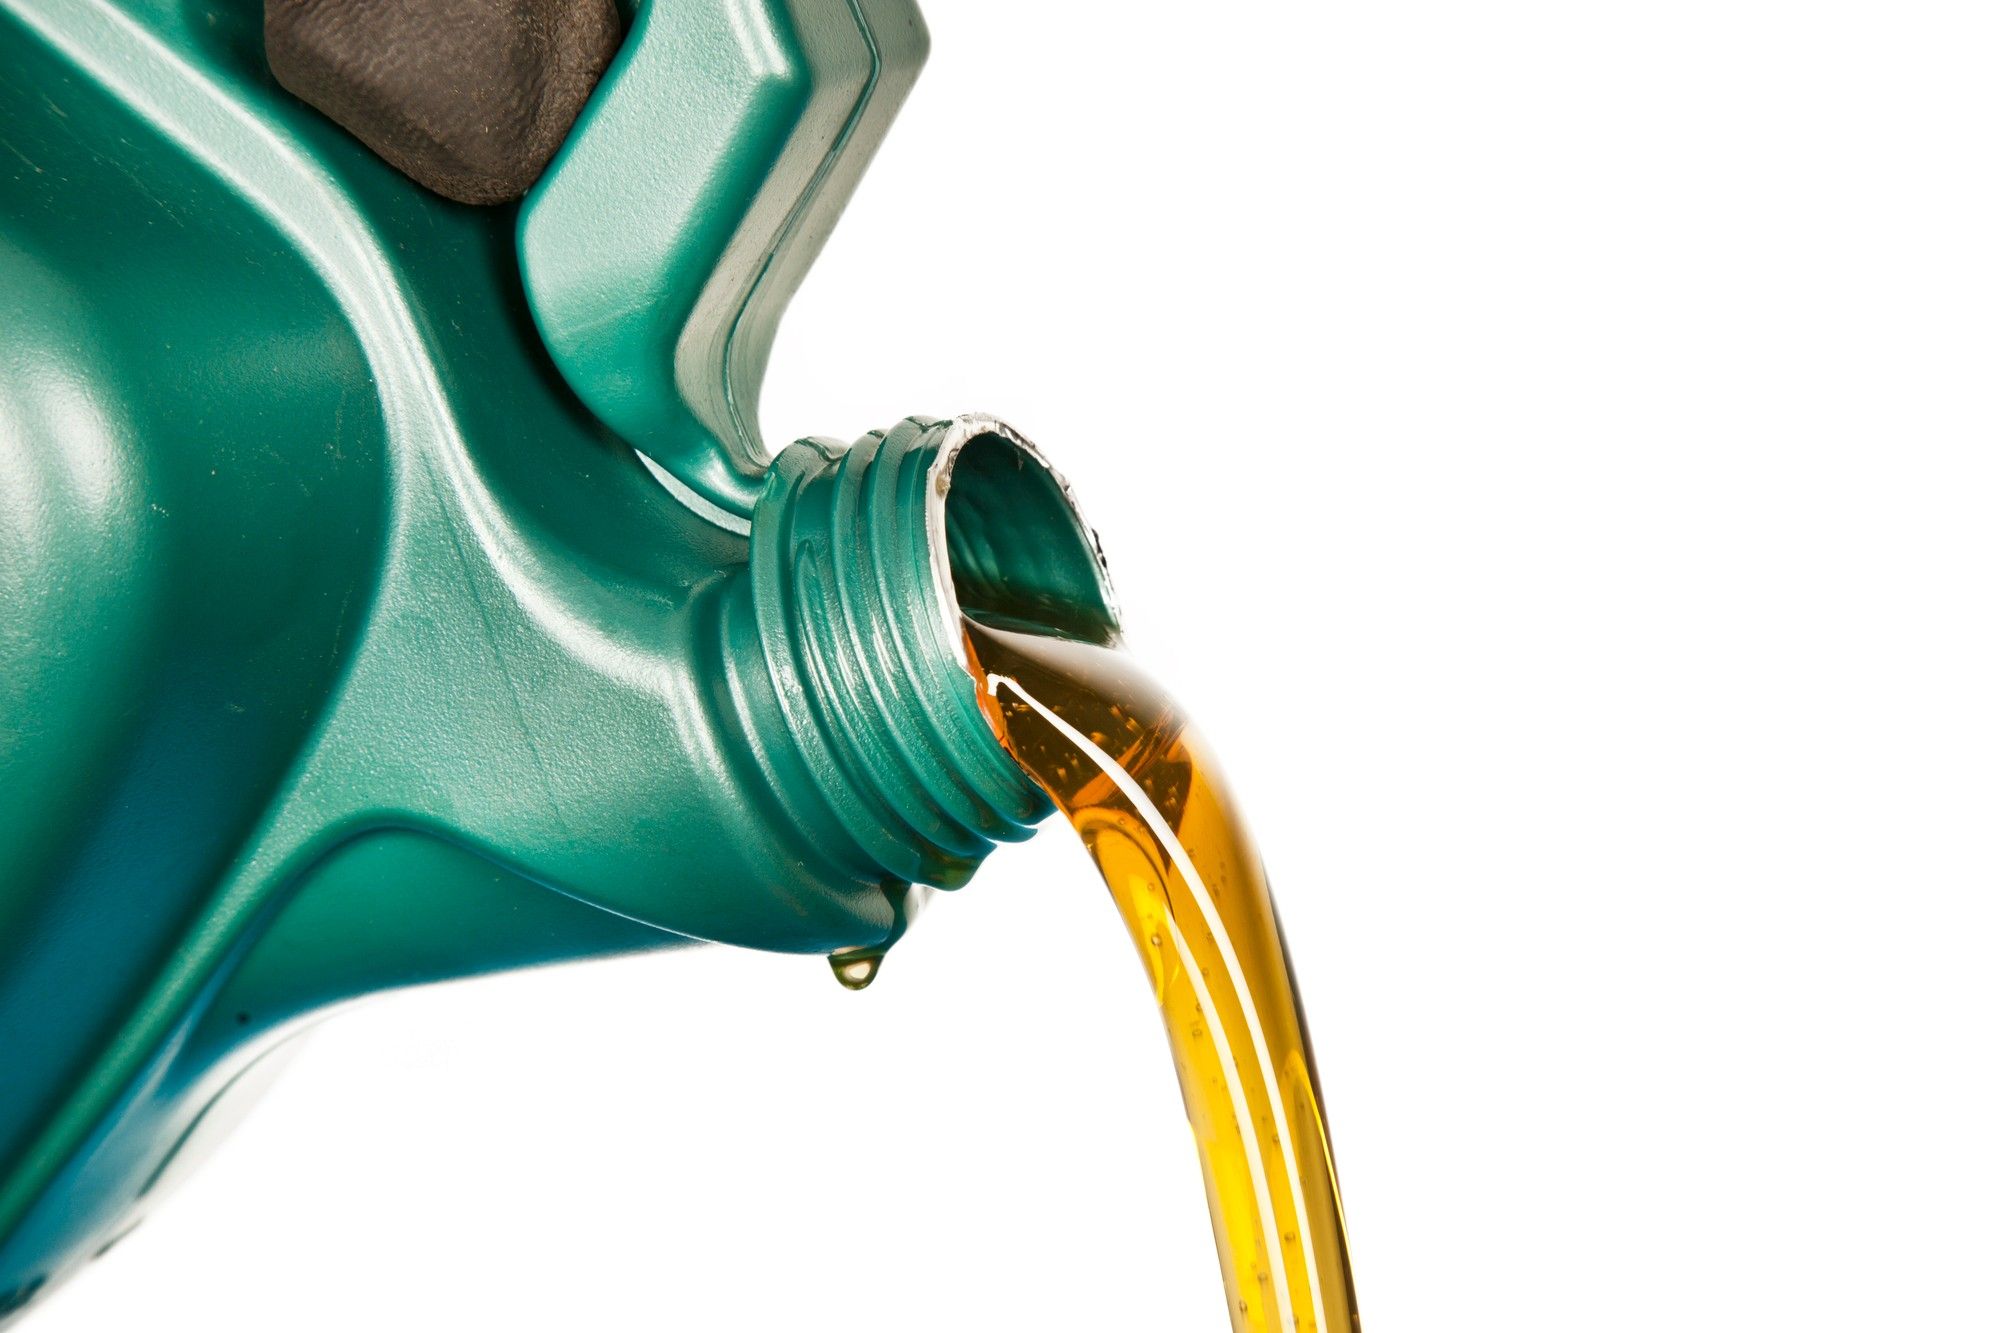 Tractor transmission fluid can allegedly harm engines.